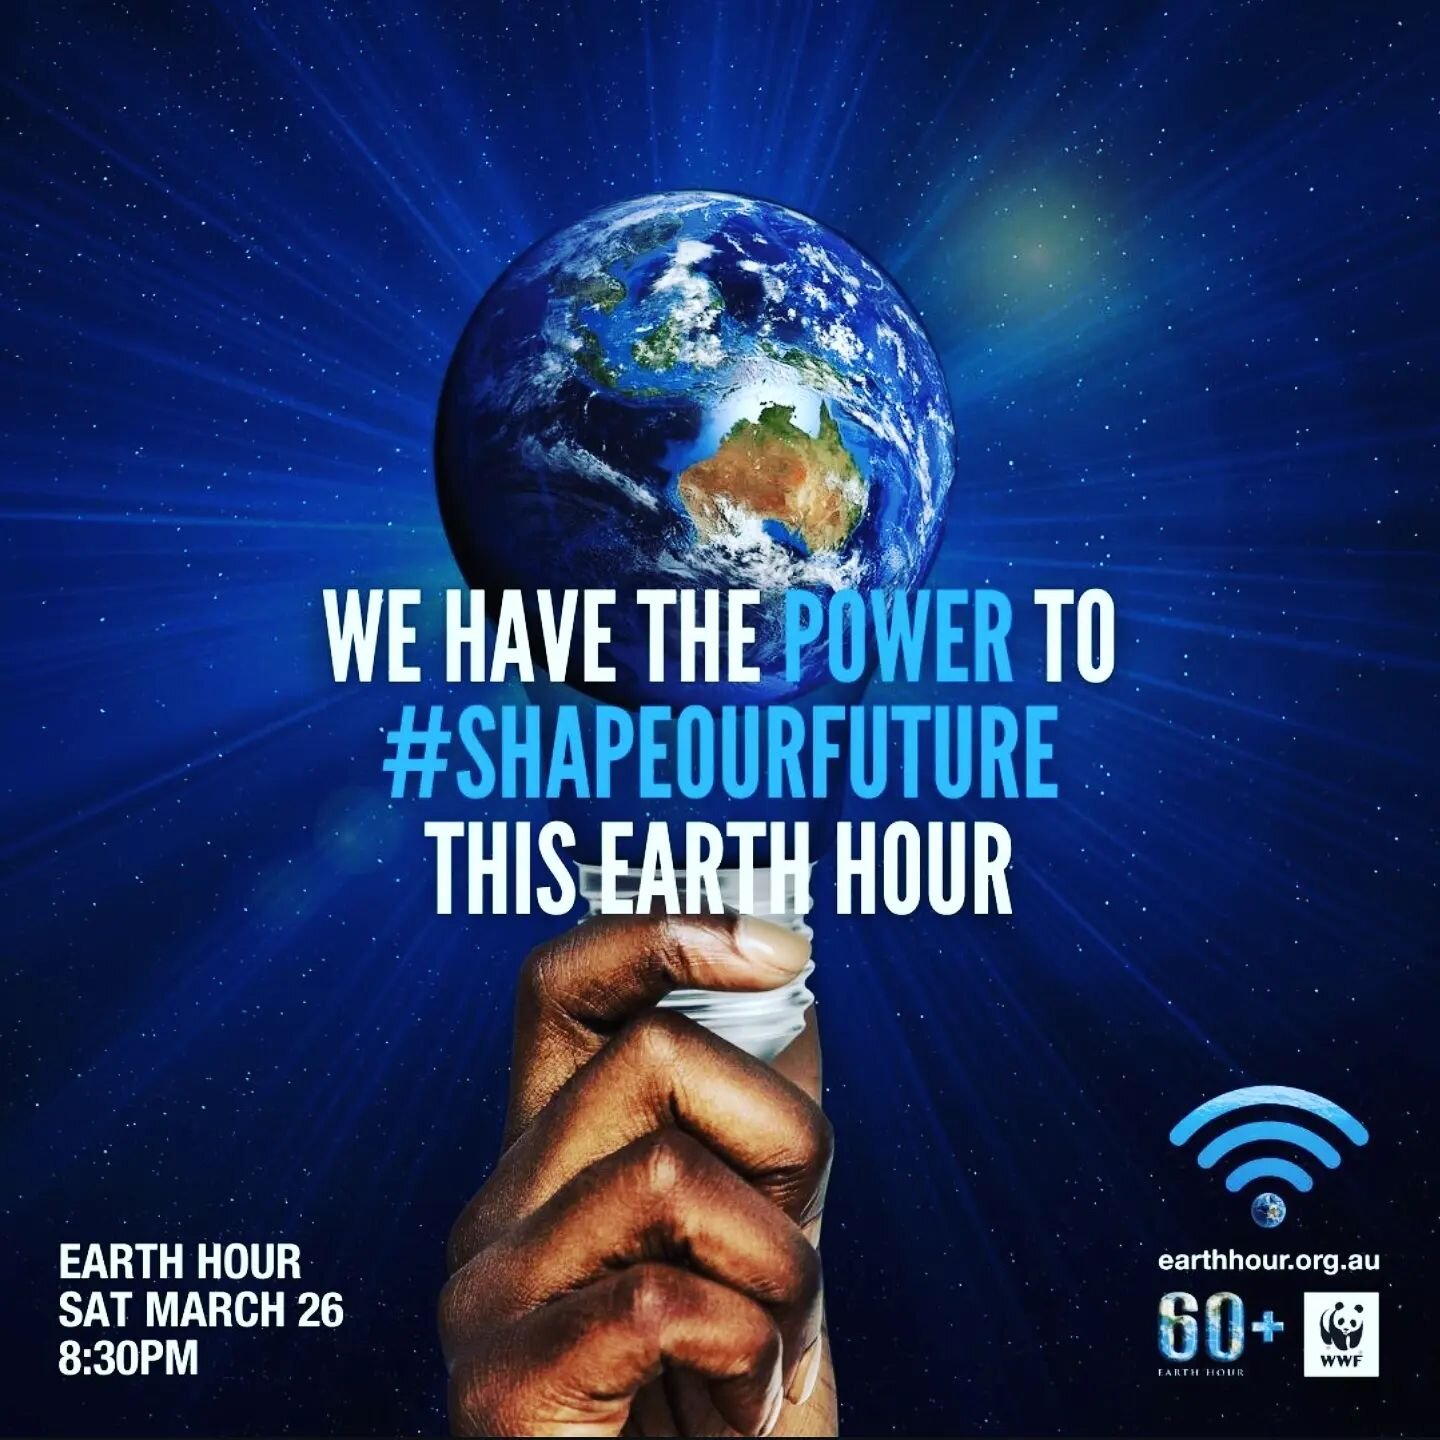 Join us at 8:30pm local time tonight in switching off for #EarthHour to support stronger action for climate change. This is an important issue, as we only have one Earth to live on 🌏

We encourage any of our students to participate also, by switchin